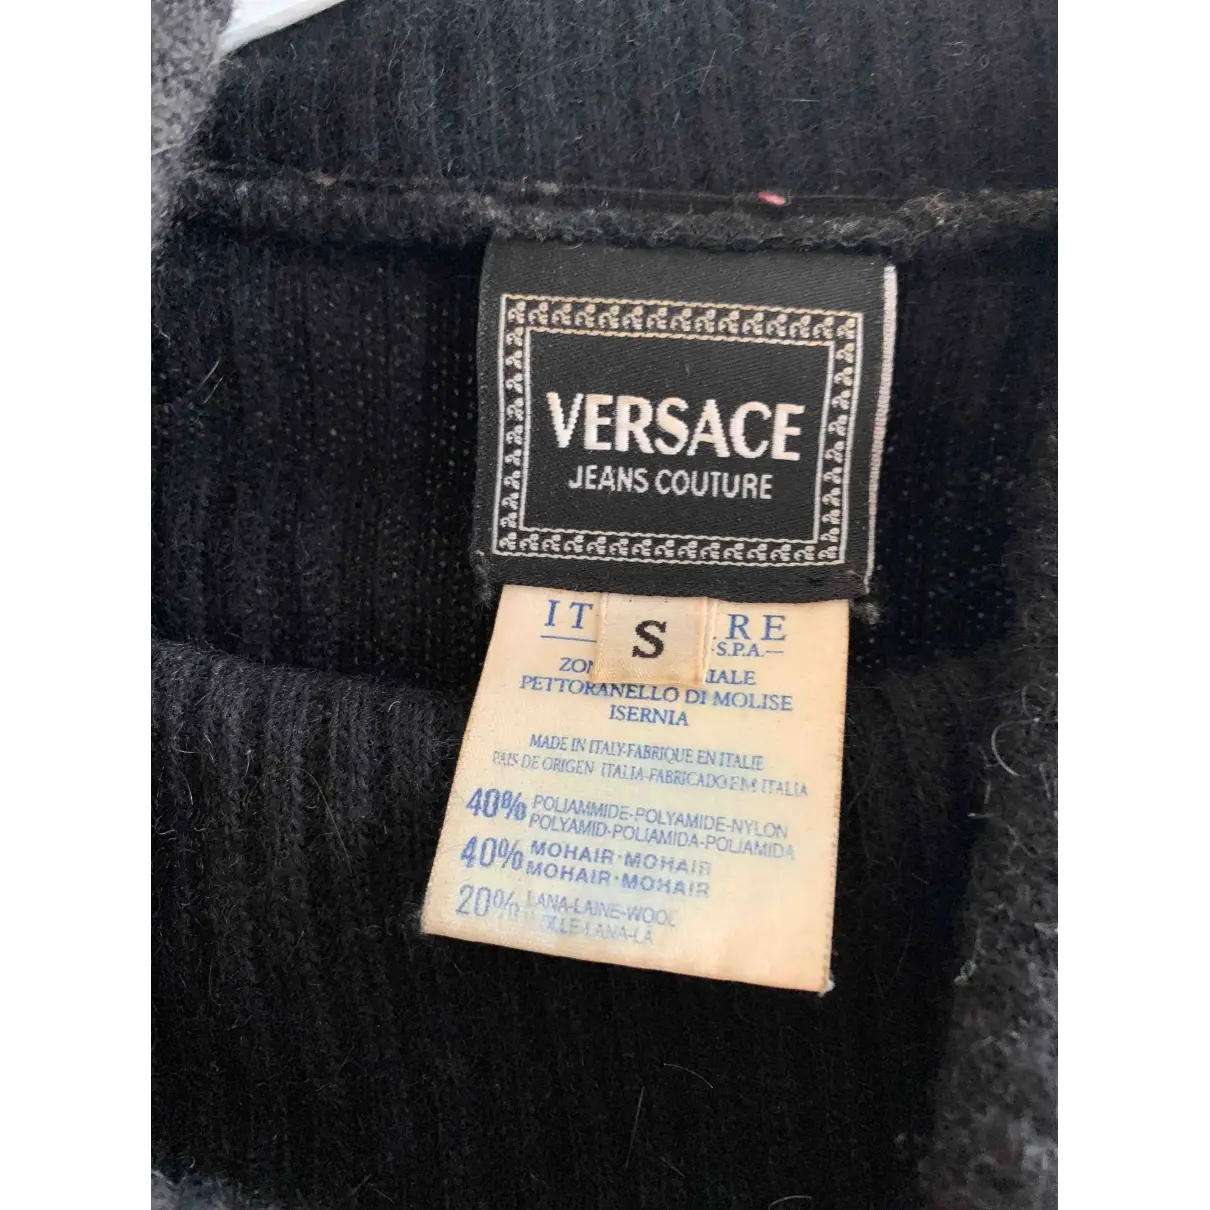 Buy Versace Jeans Couture Jumper online